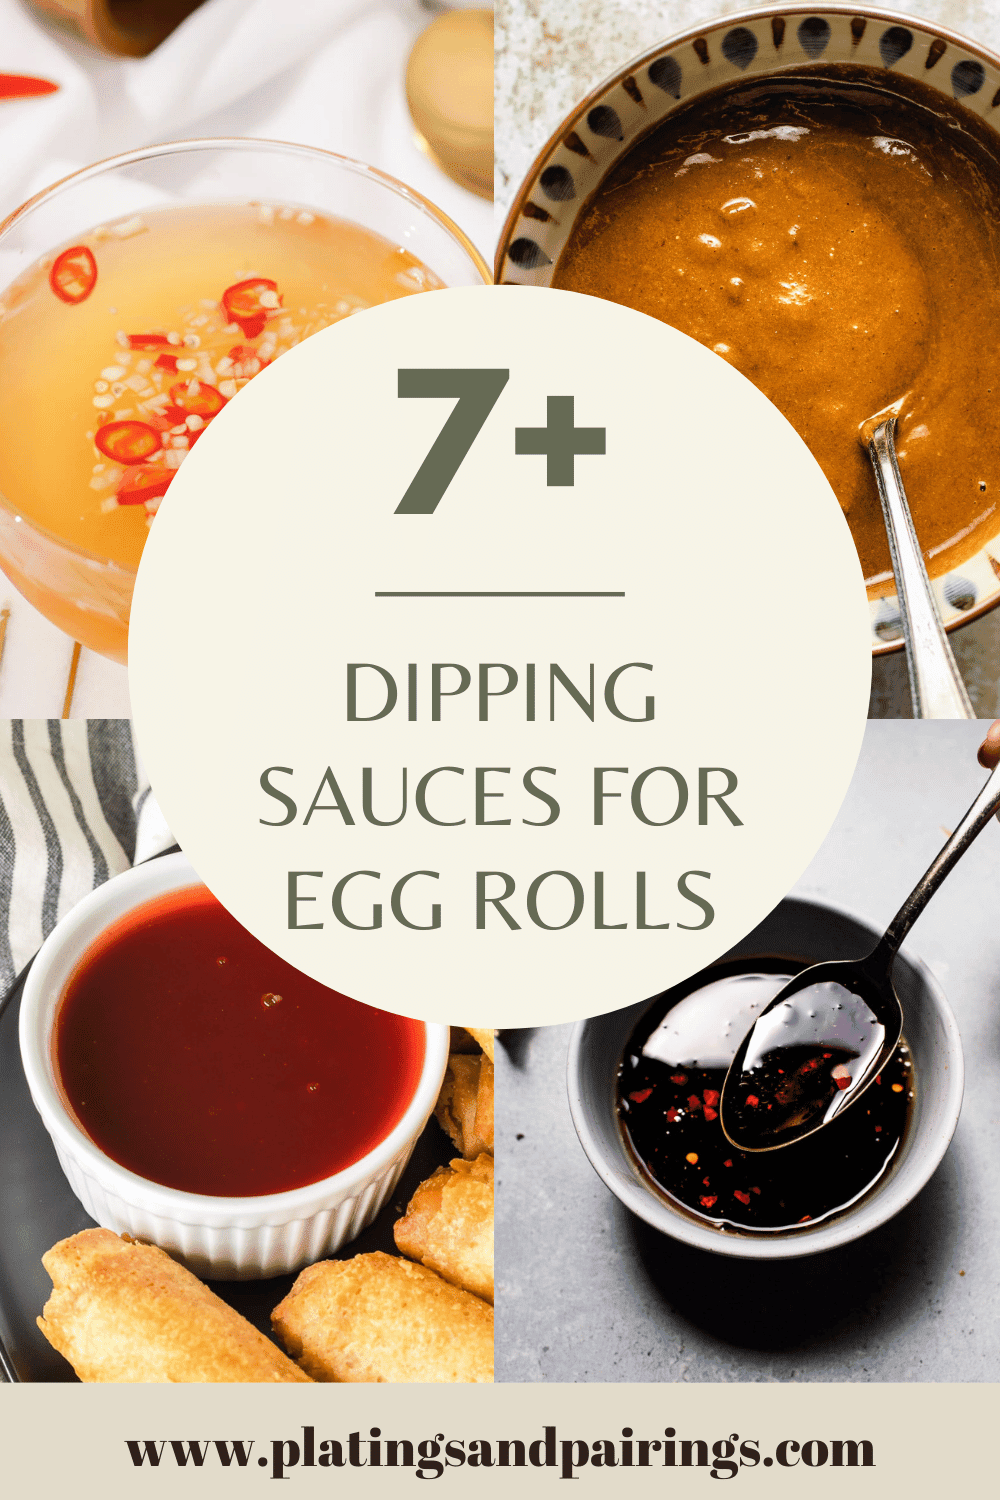 Collage of dipping sauces for egg rolls with text overlay.